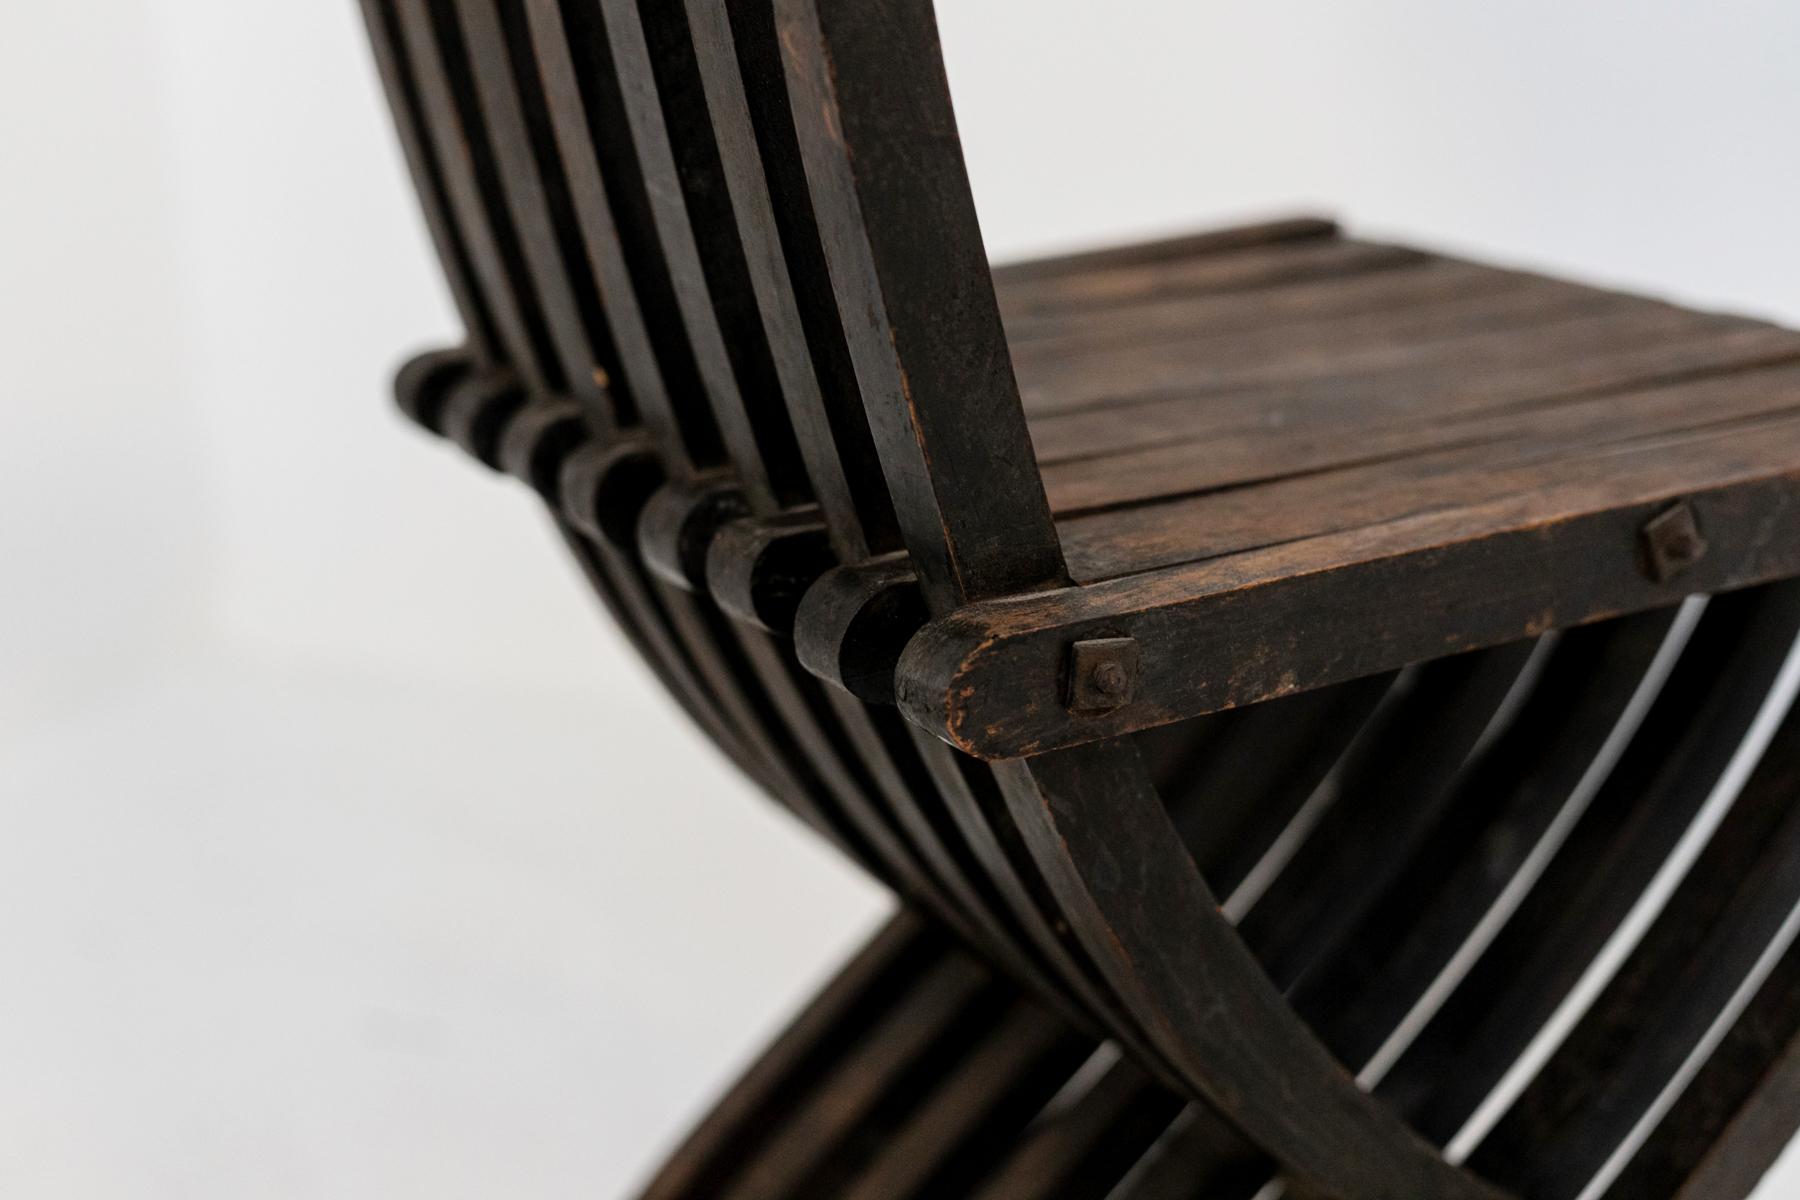 The vintage chair is from the 30s and is of fine Italian manufacture. Made in fine dark wood with inlays. The unique chair has wooden intertwined stave that through a mechanism, close on themselves making the chair partially foldable. The top of the